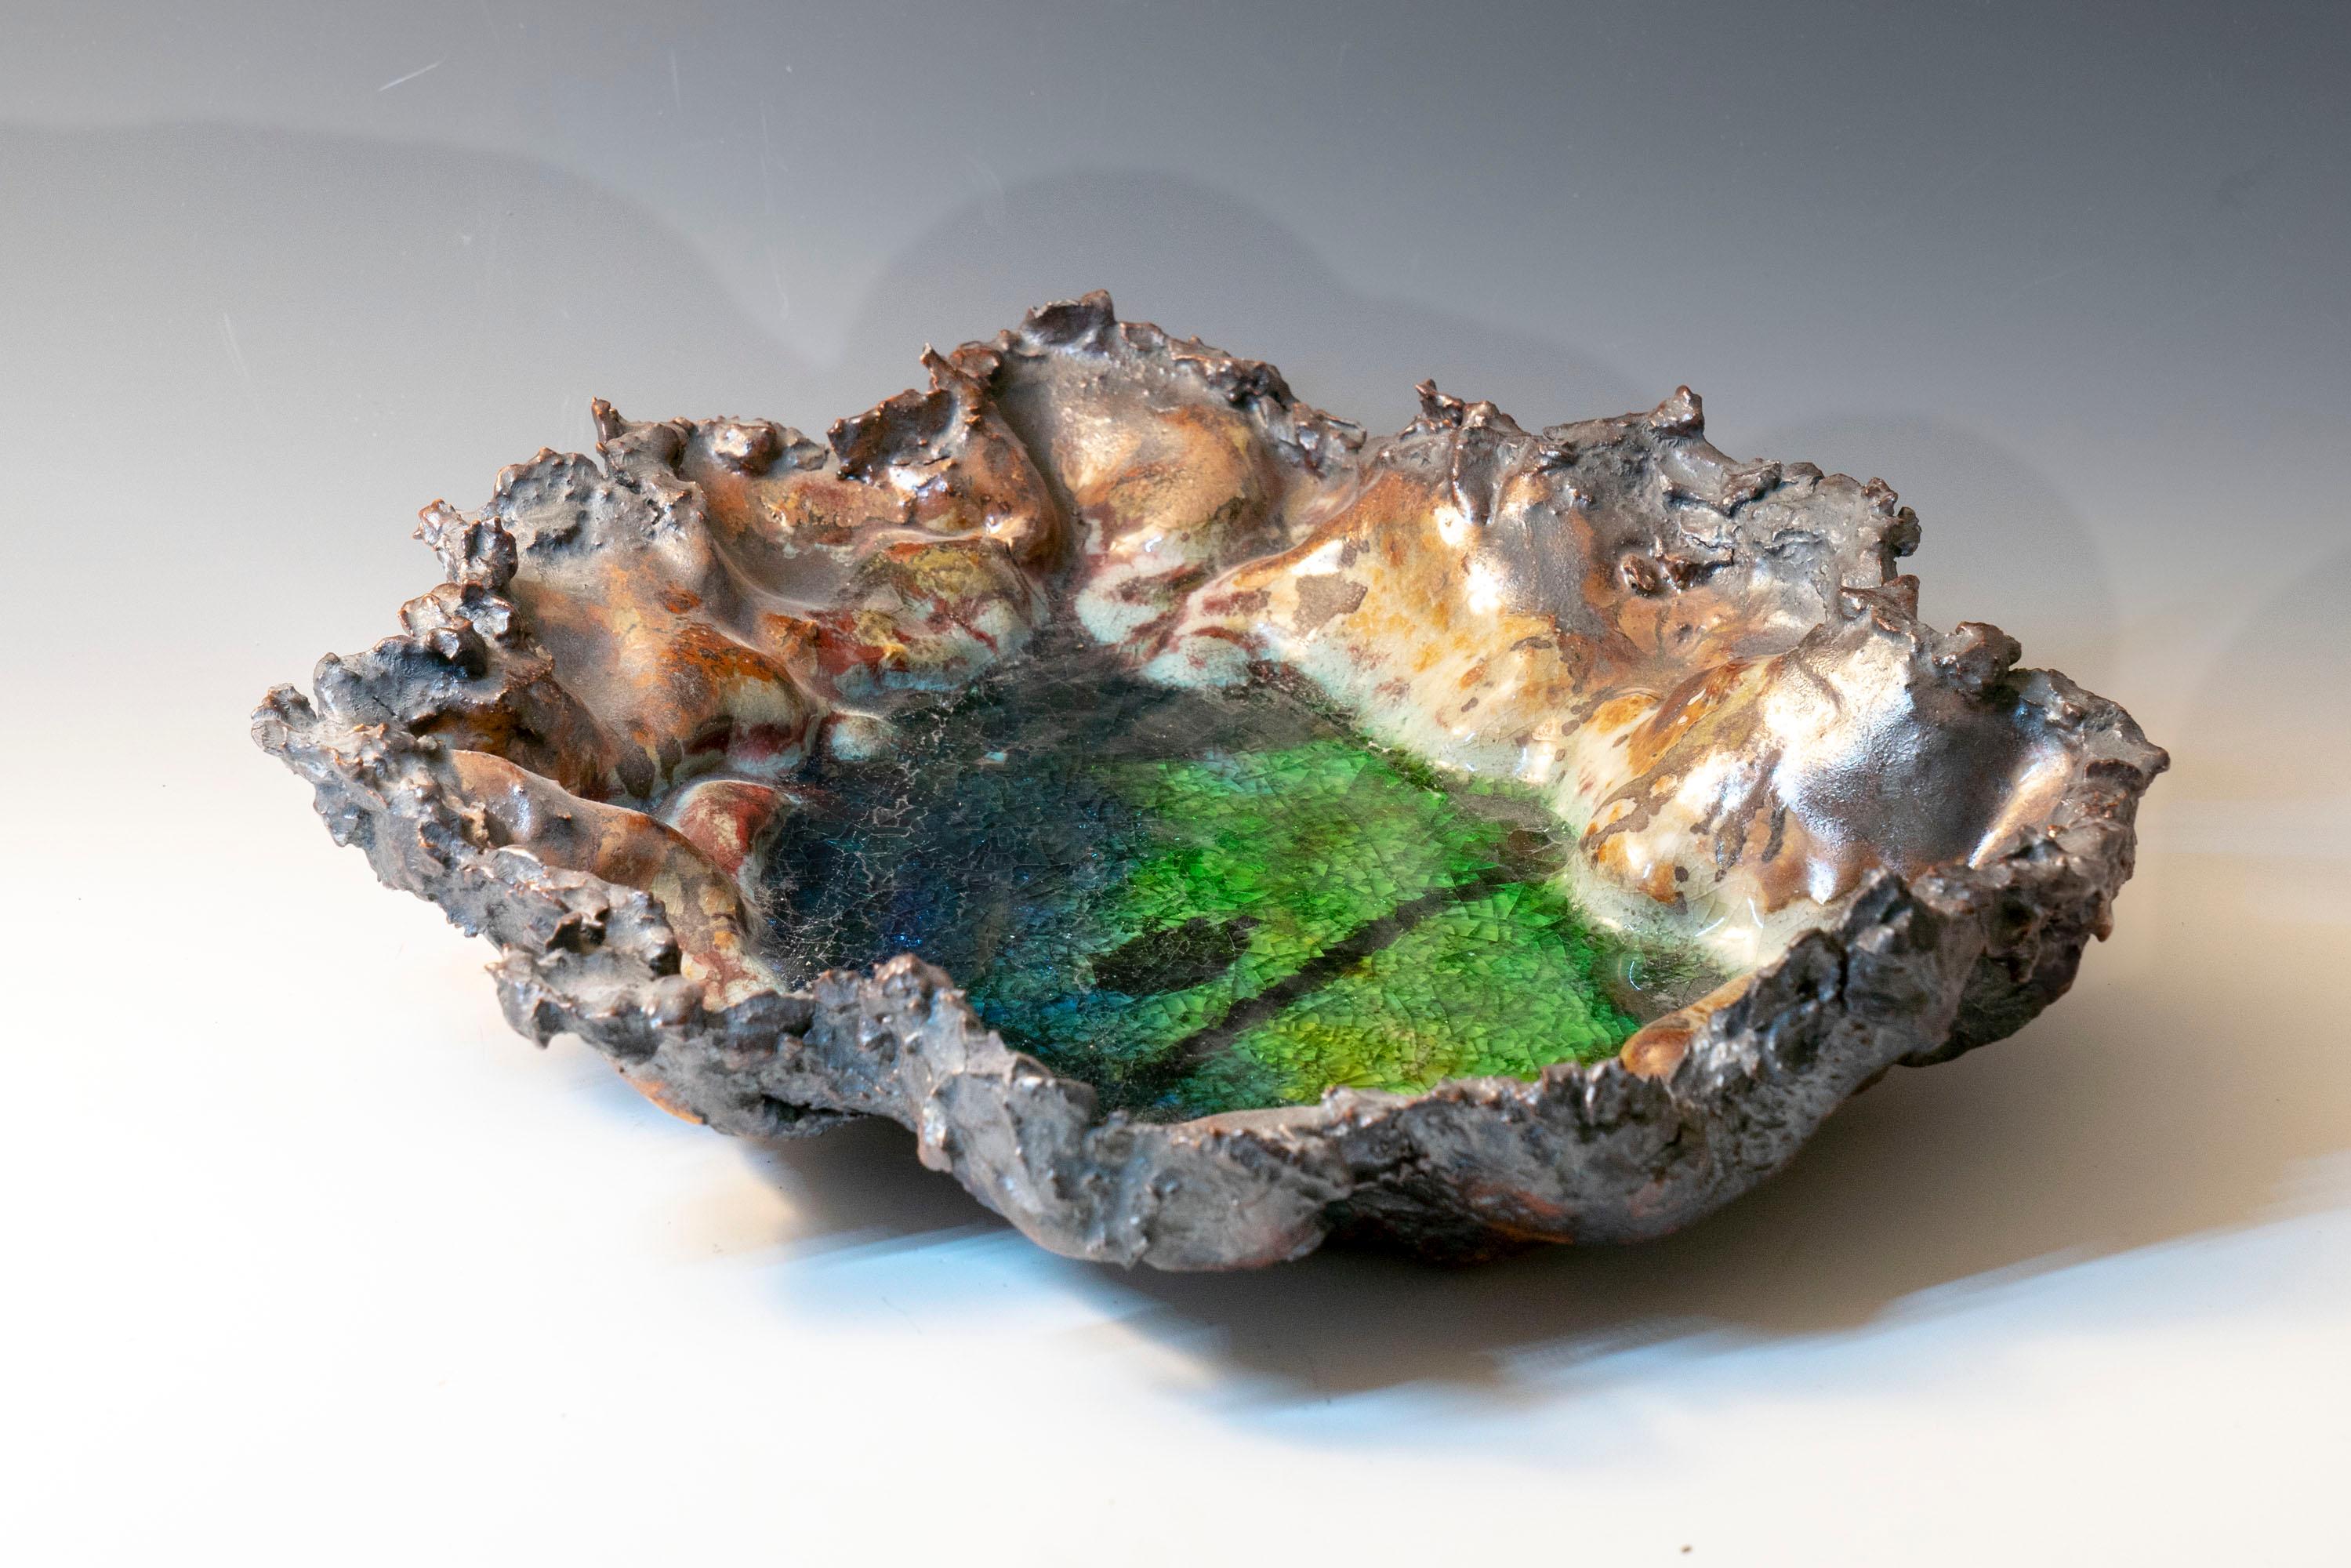 River Series 1, textured ceramic in brilliant greens and browns, embodies the essence of clay in its organic shapes that refer directly to the earth and nature. The artist says 